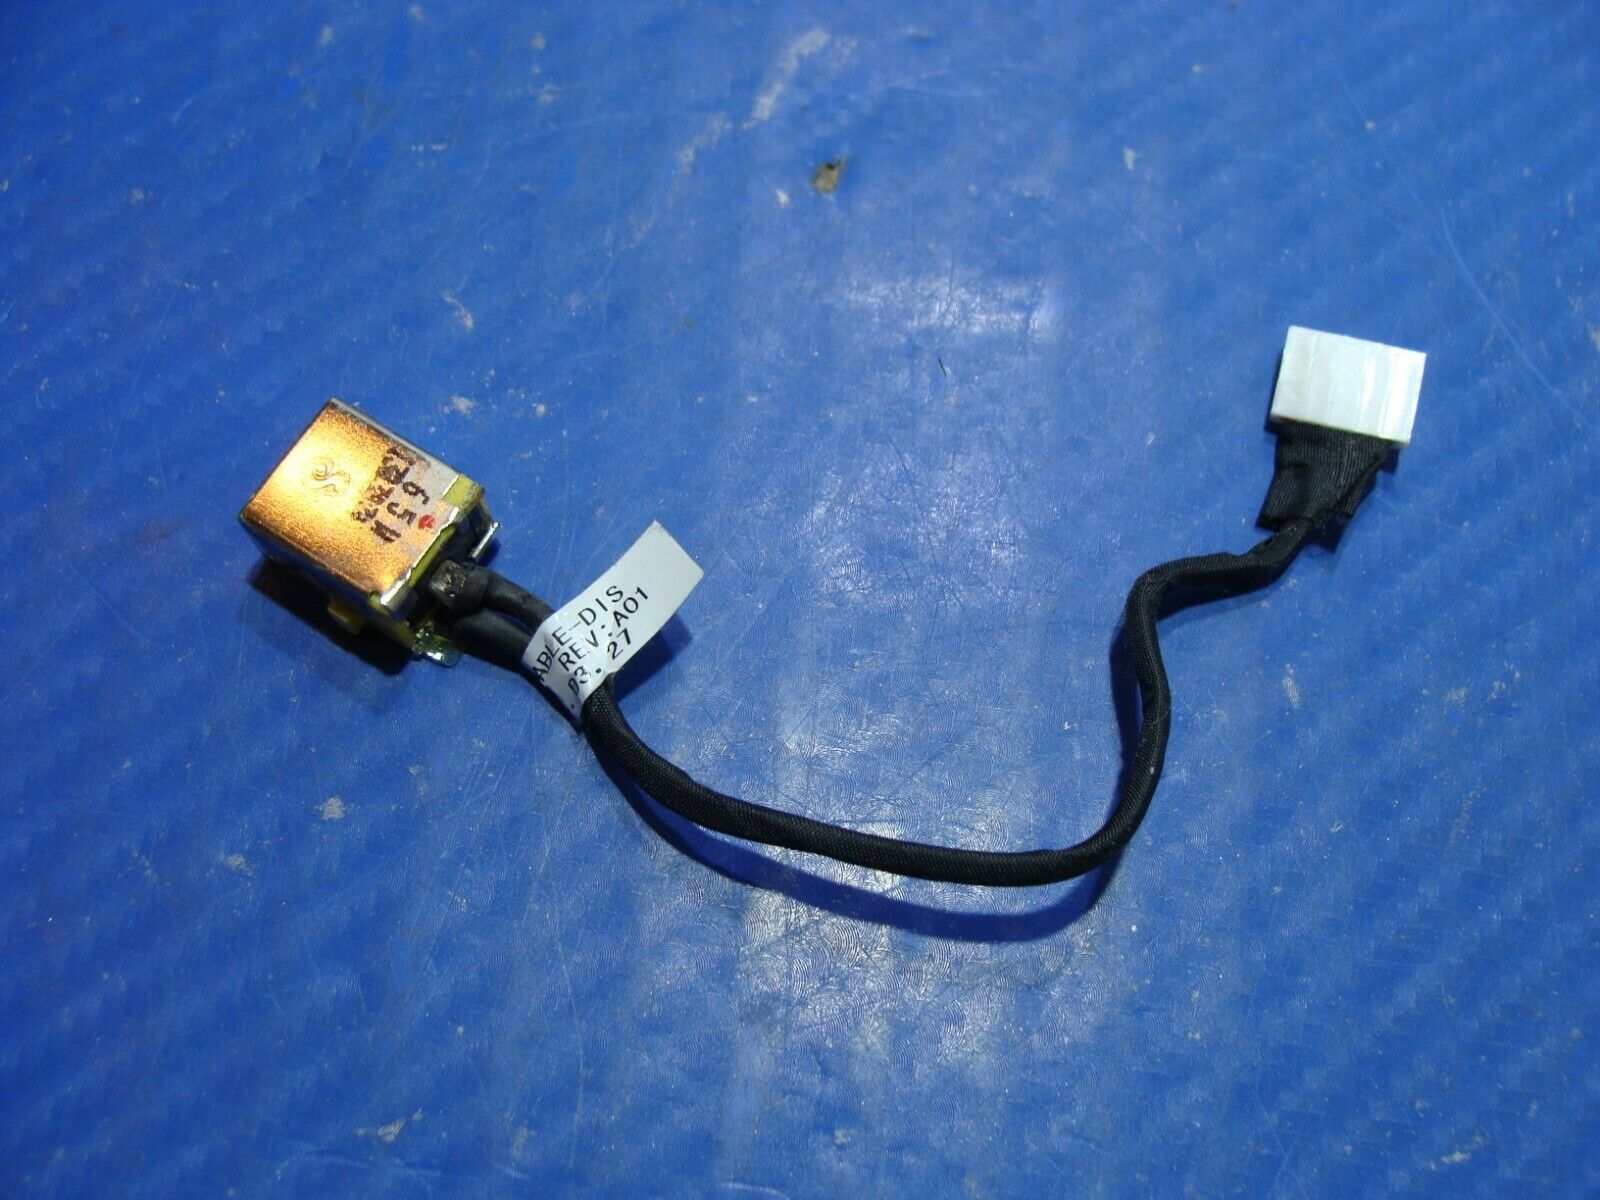 Acer Aspire V5-571P 15.6" Genuine Laptop DC IN Power Jack w/Cable 50.4TU04.032 Acer